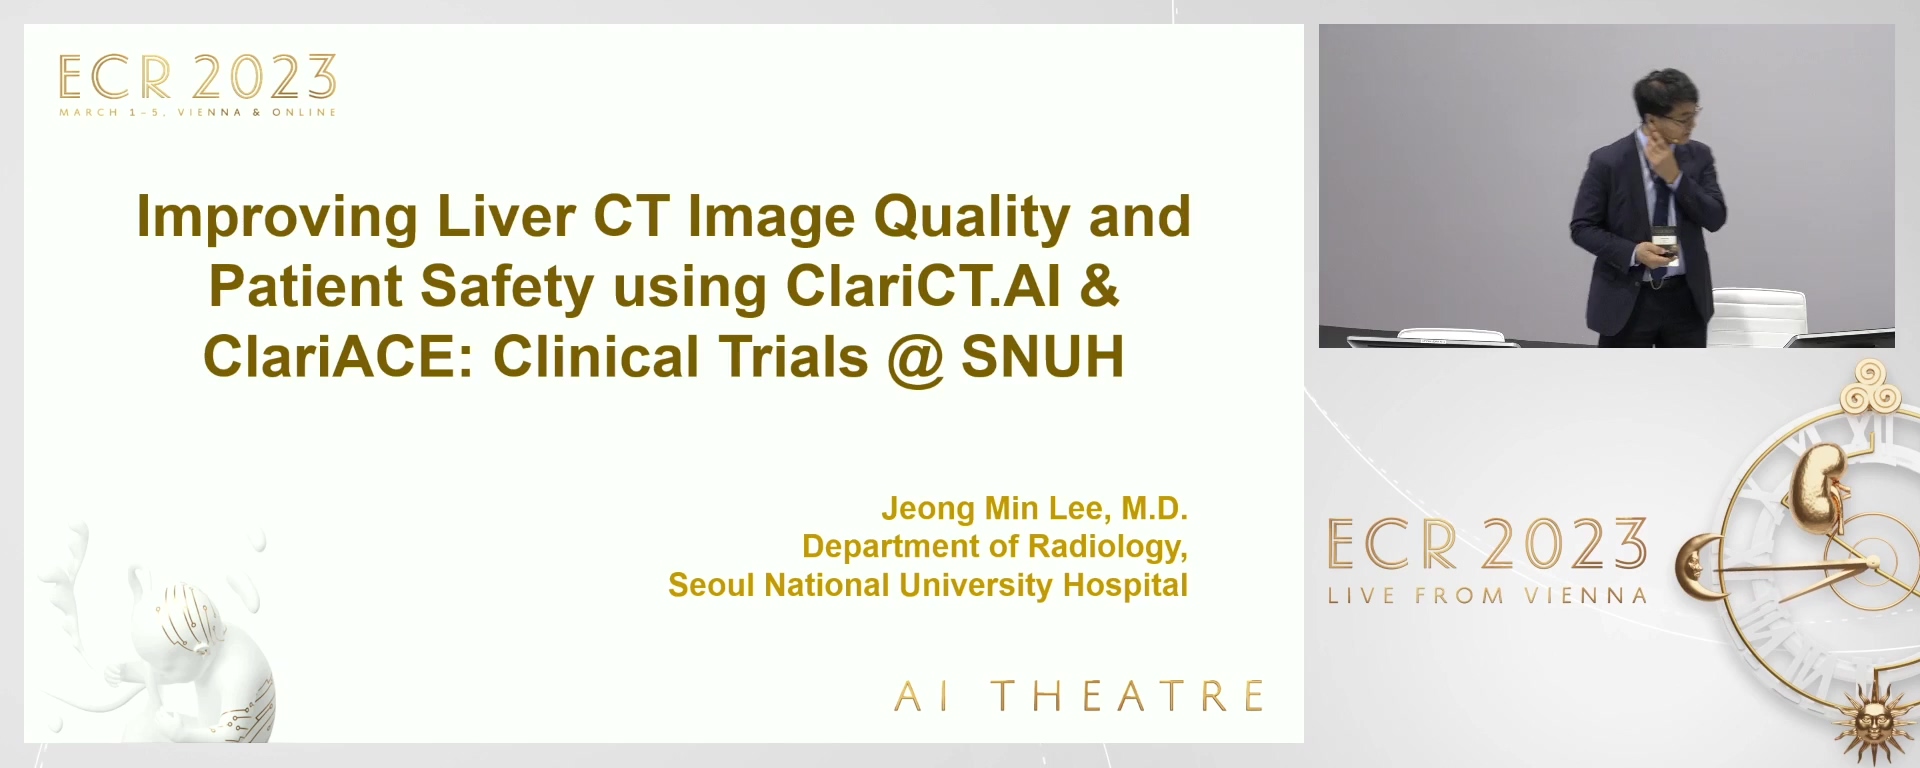 Is ultra-low-dose CT possible in liver imaging with deep learning? Report of pivotal multicenter prospective clinical trial with ClariCT.AI - Jeong-min Lee, Seoul / KR